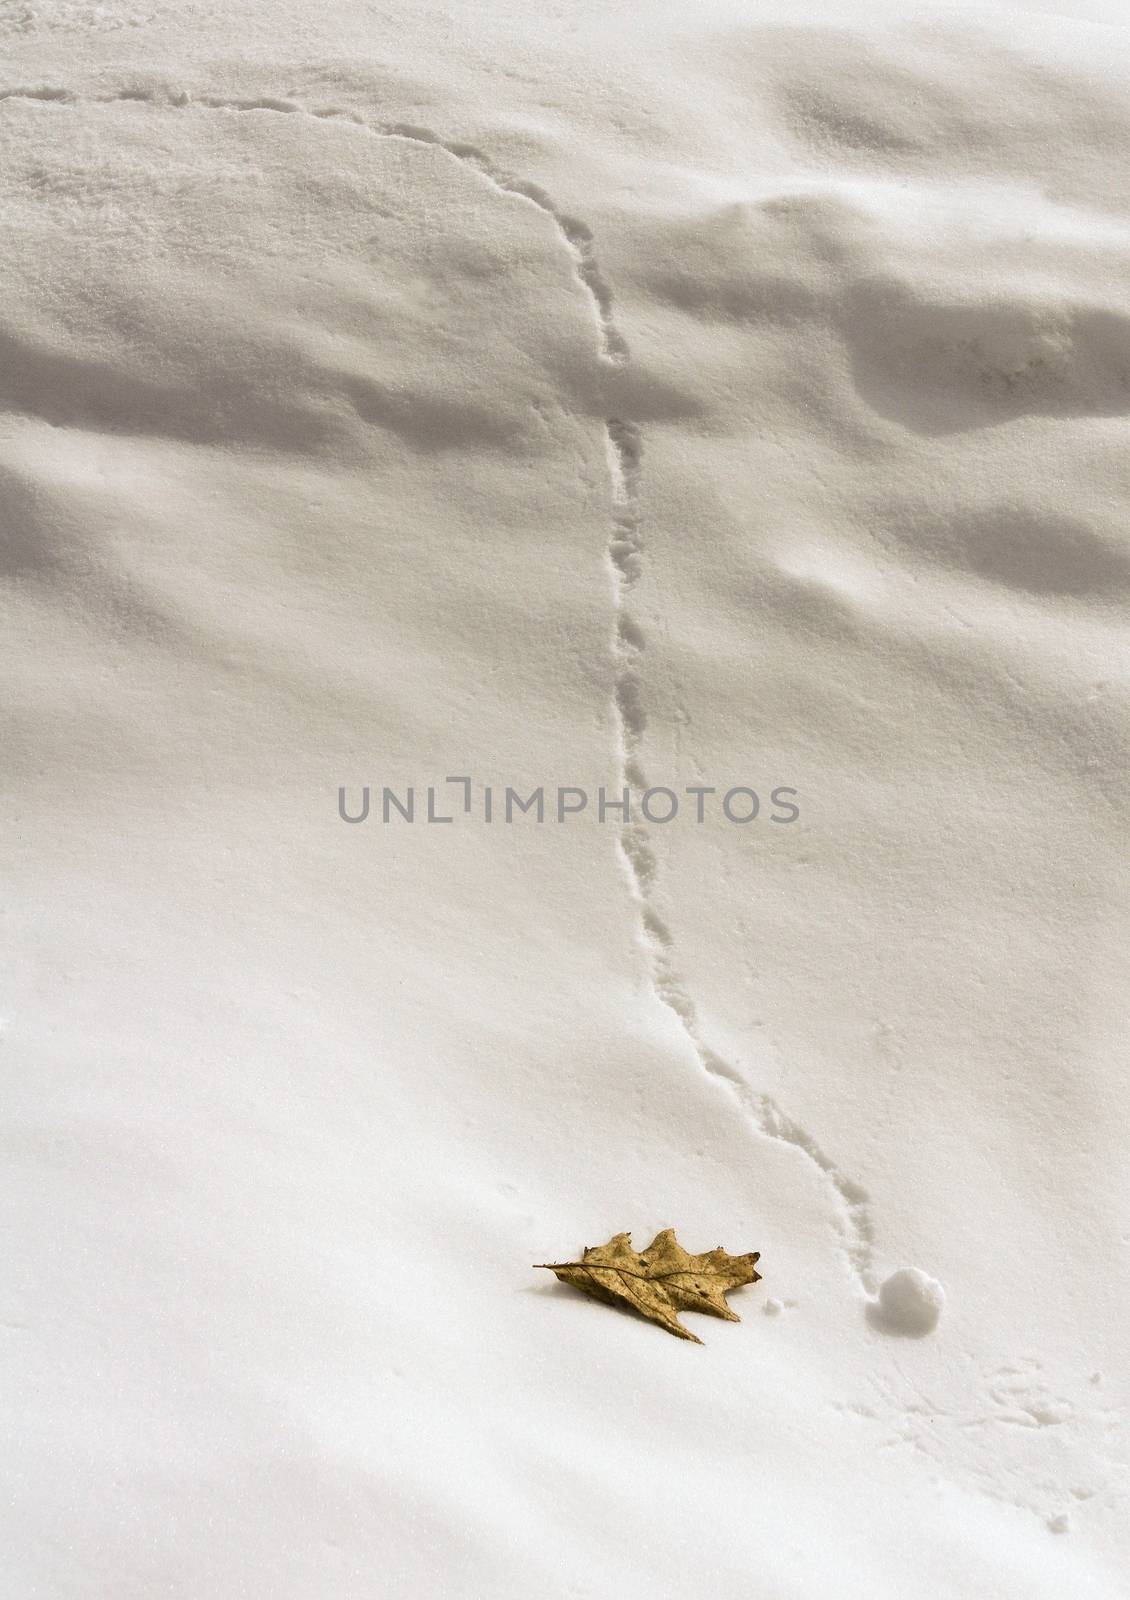 Tiny Snowball and Single Oak Leaf by krisblackphotography